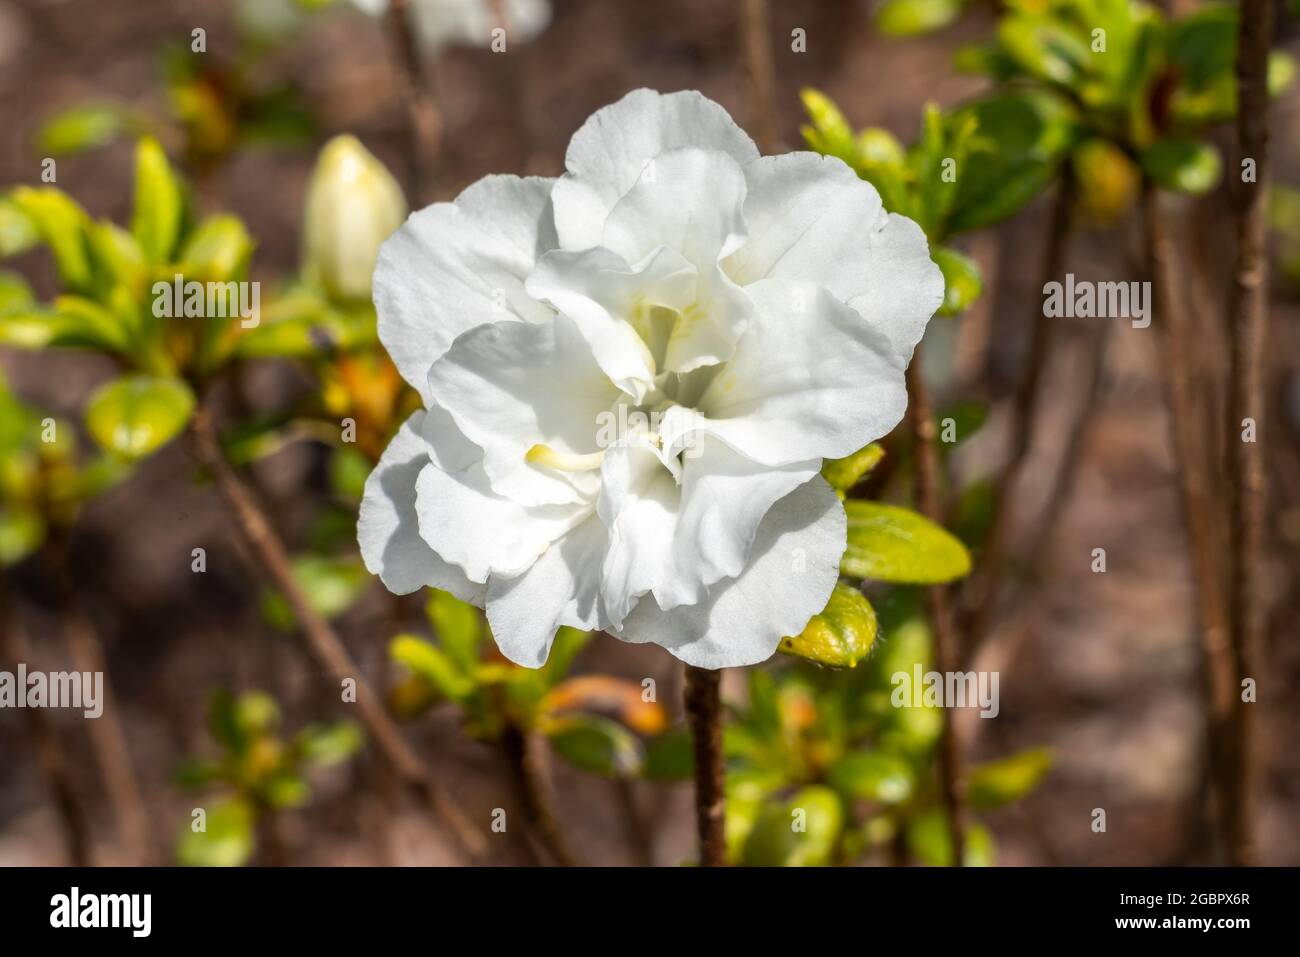 Pearl St High Resolution Stock Photography and Images - Alamy